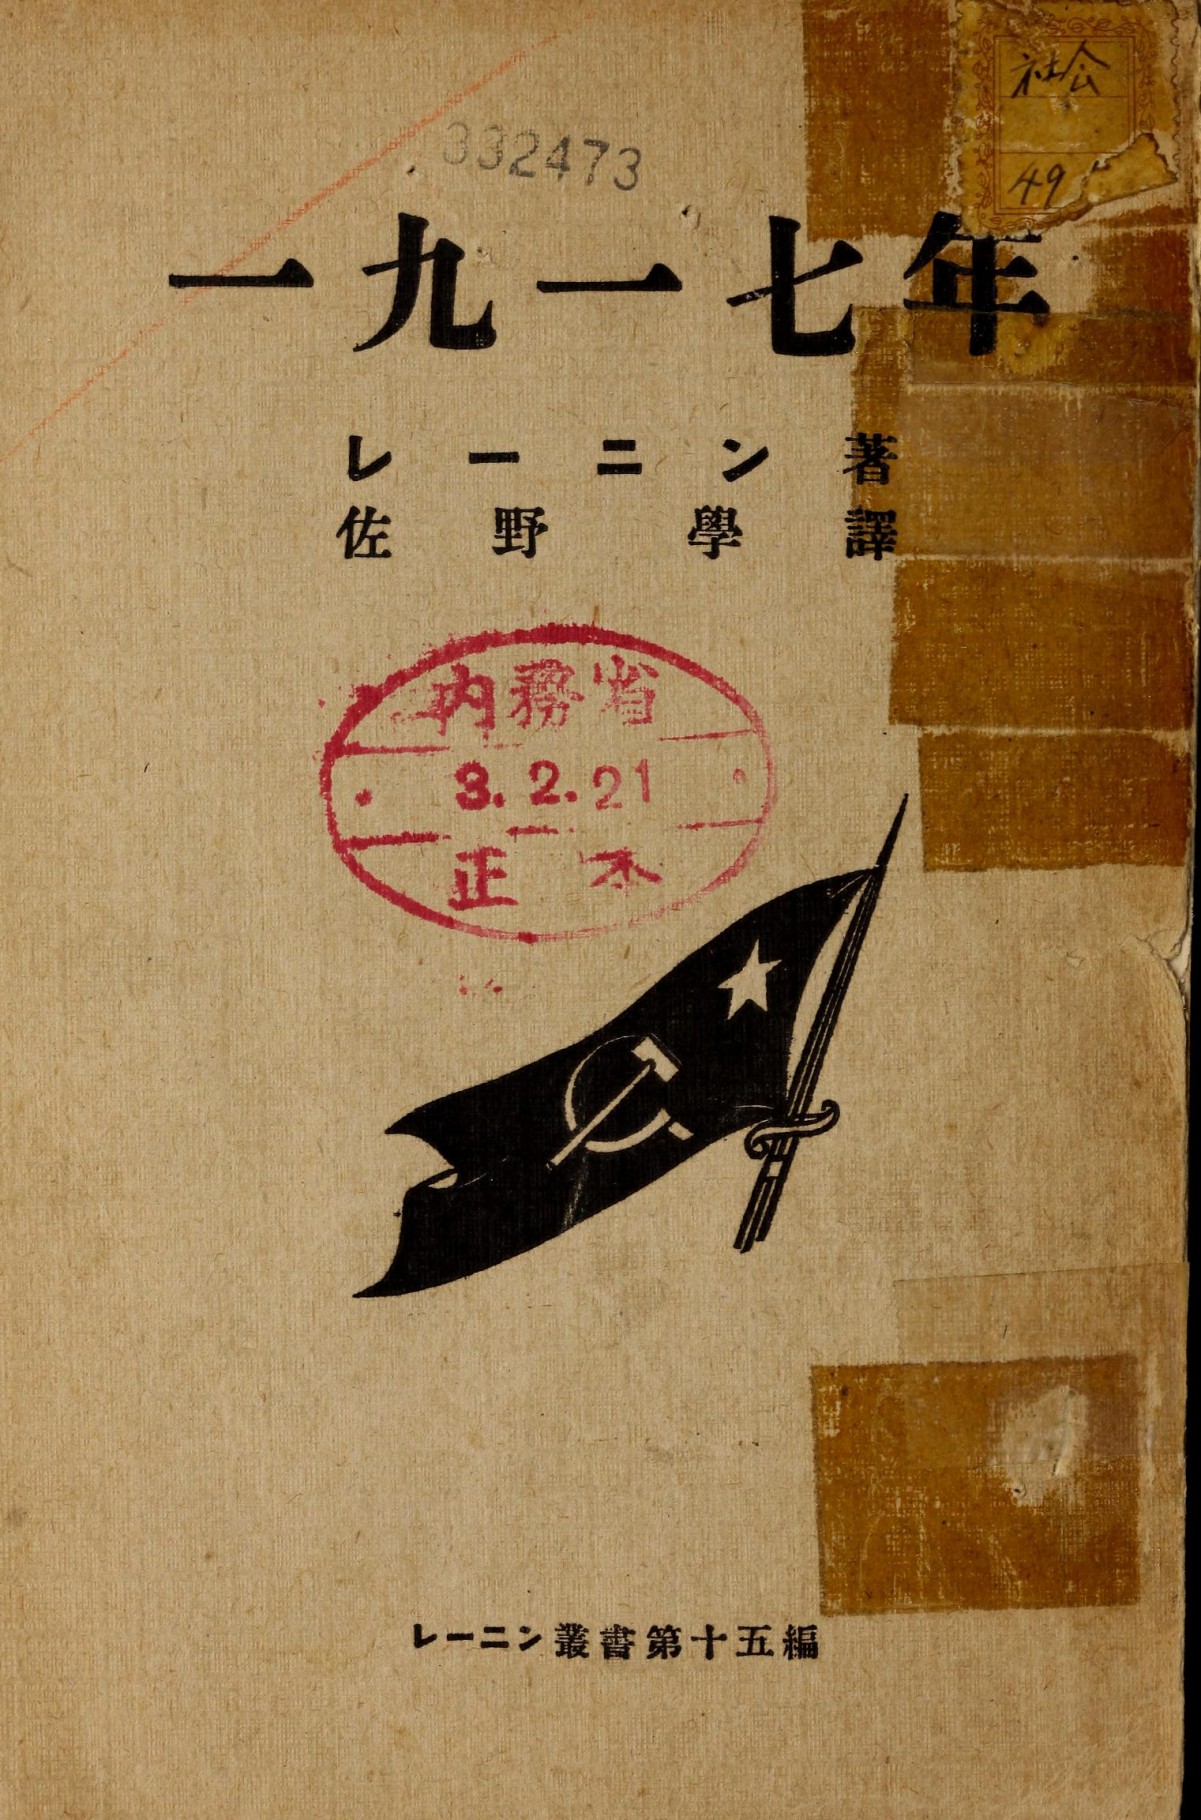 Image from the digitised collection on censorship http://dl.ndl.go.jp/info:ndljp/pid/10298383